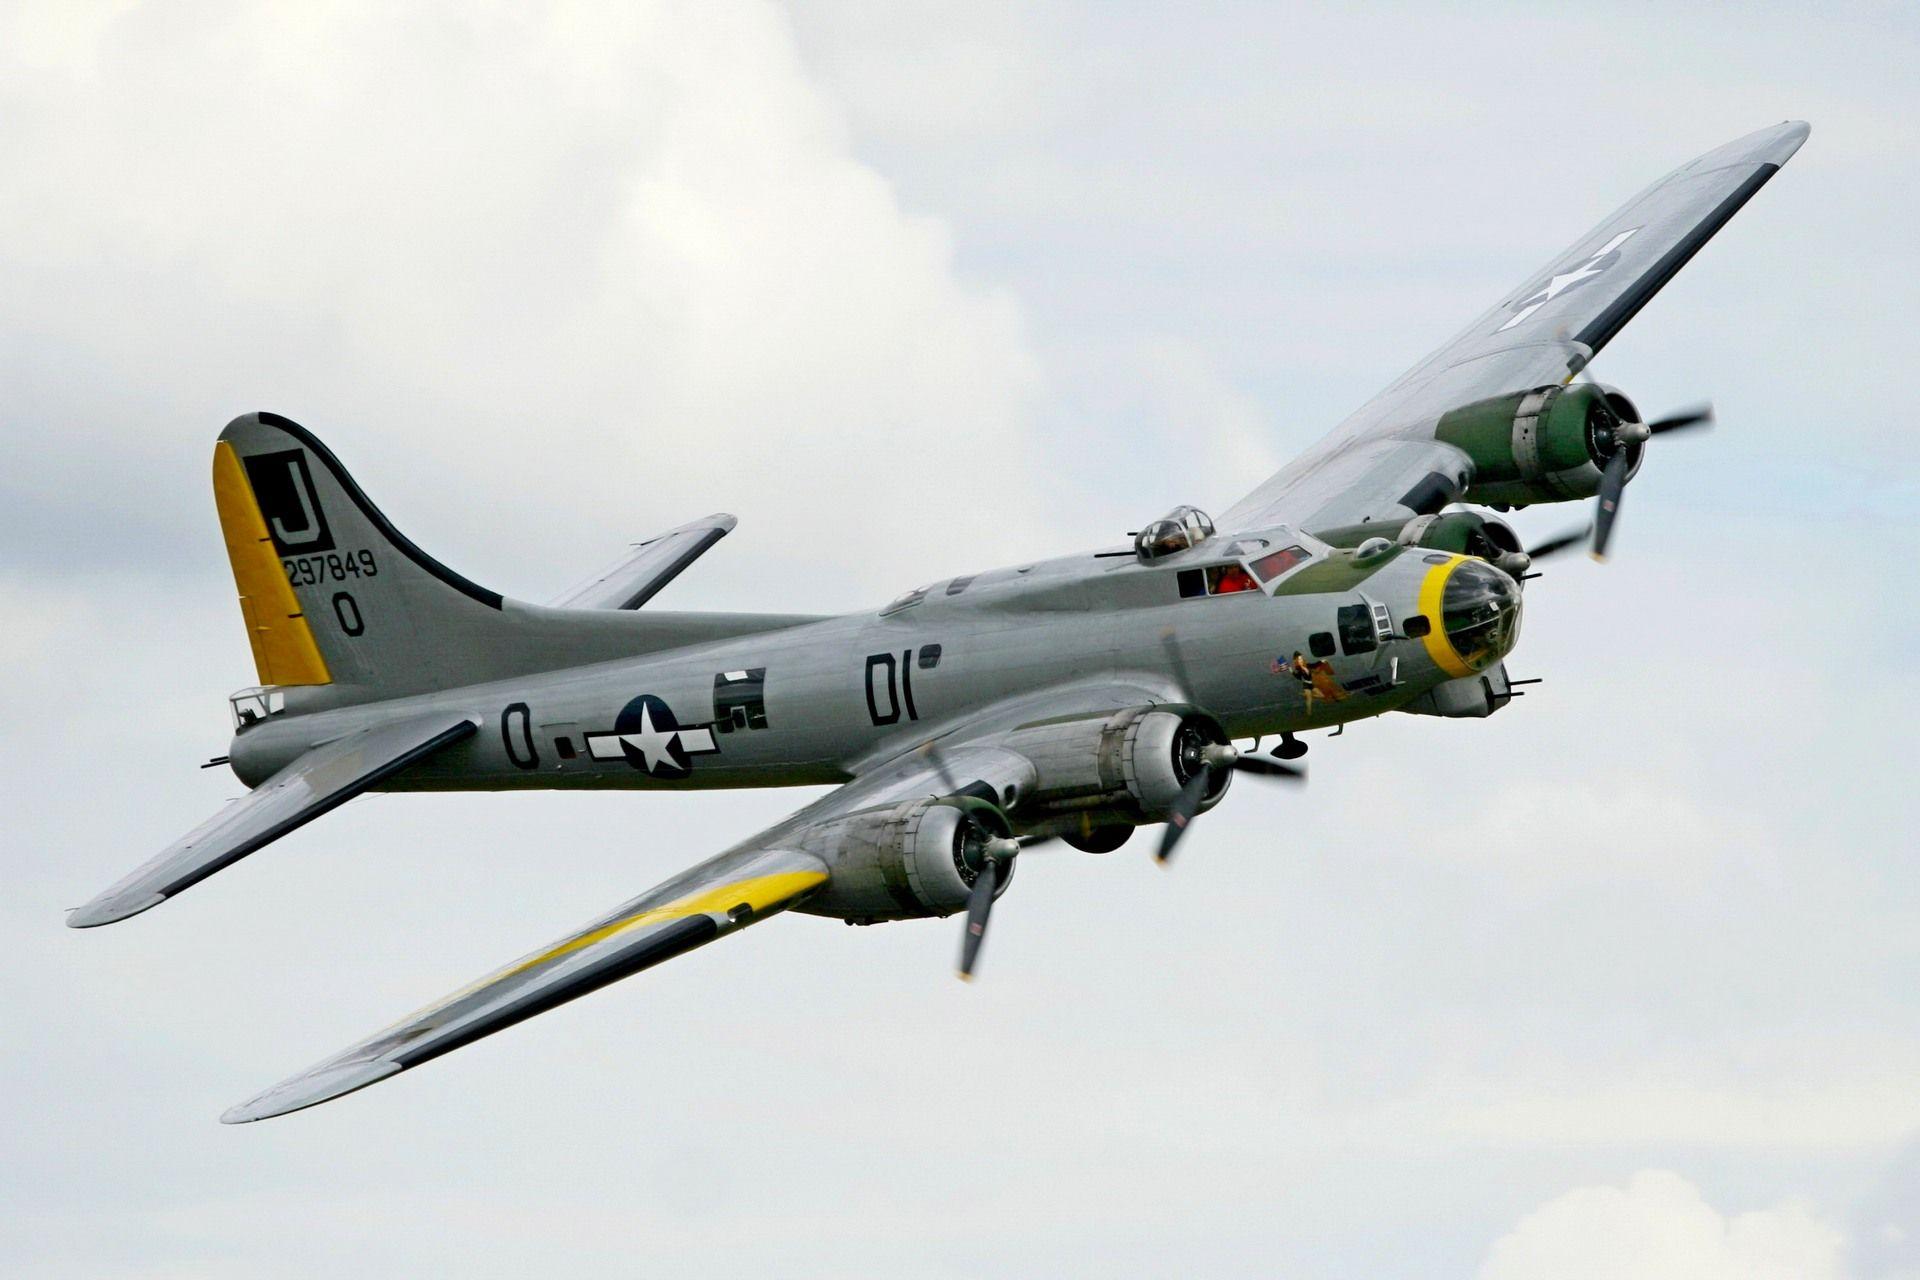 Boing B17 Flying Fortress. Space and Aviation